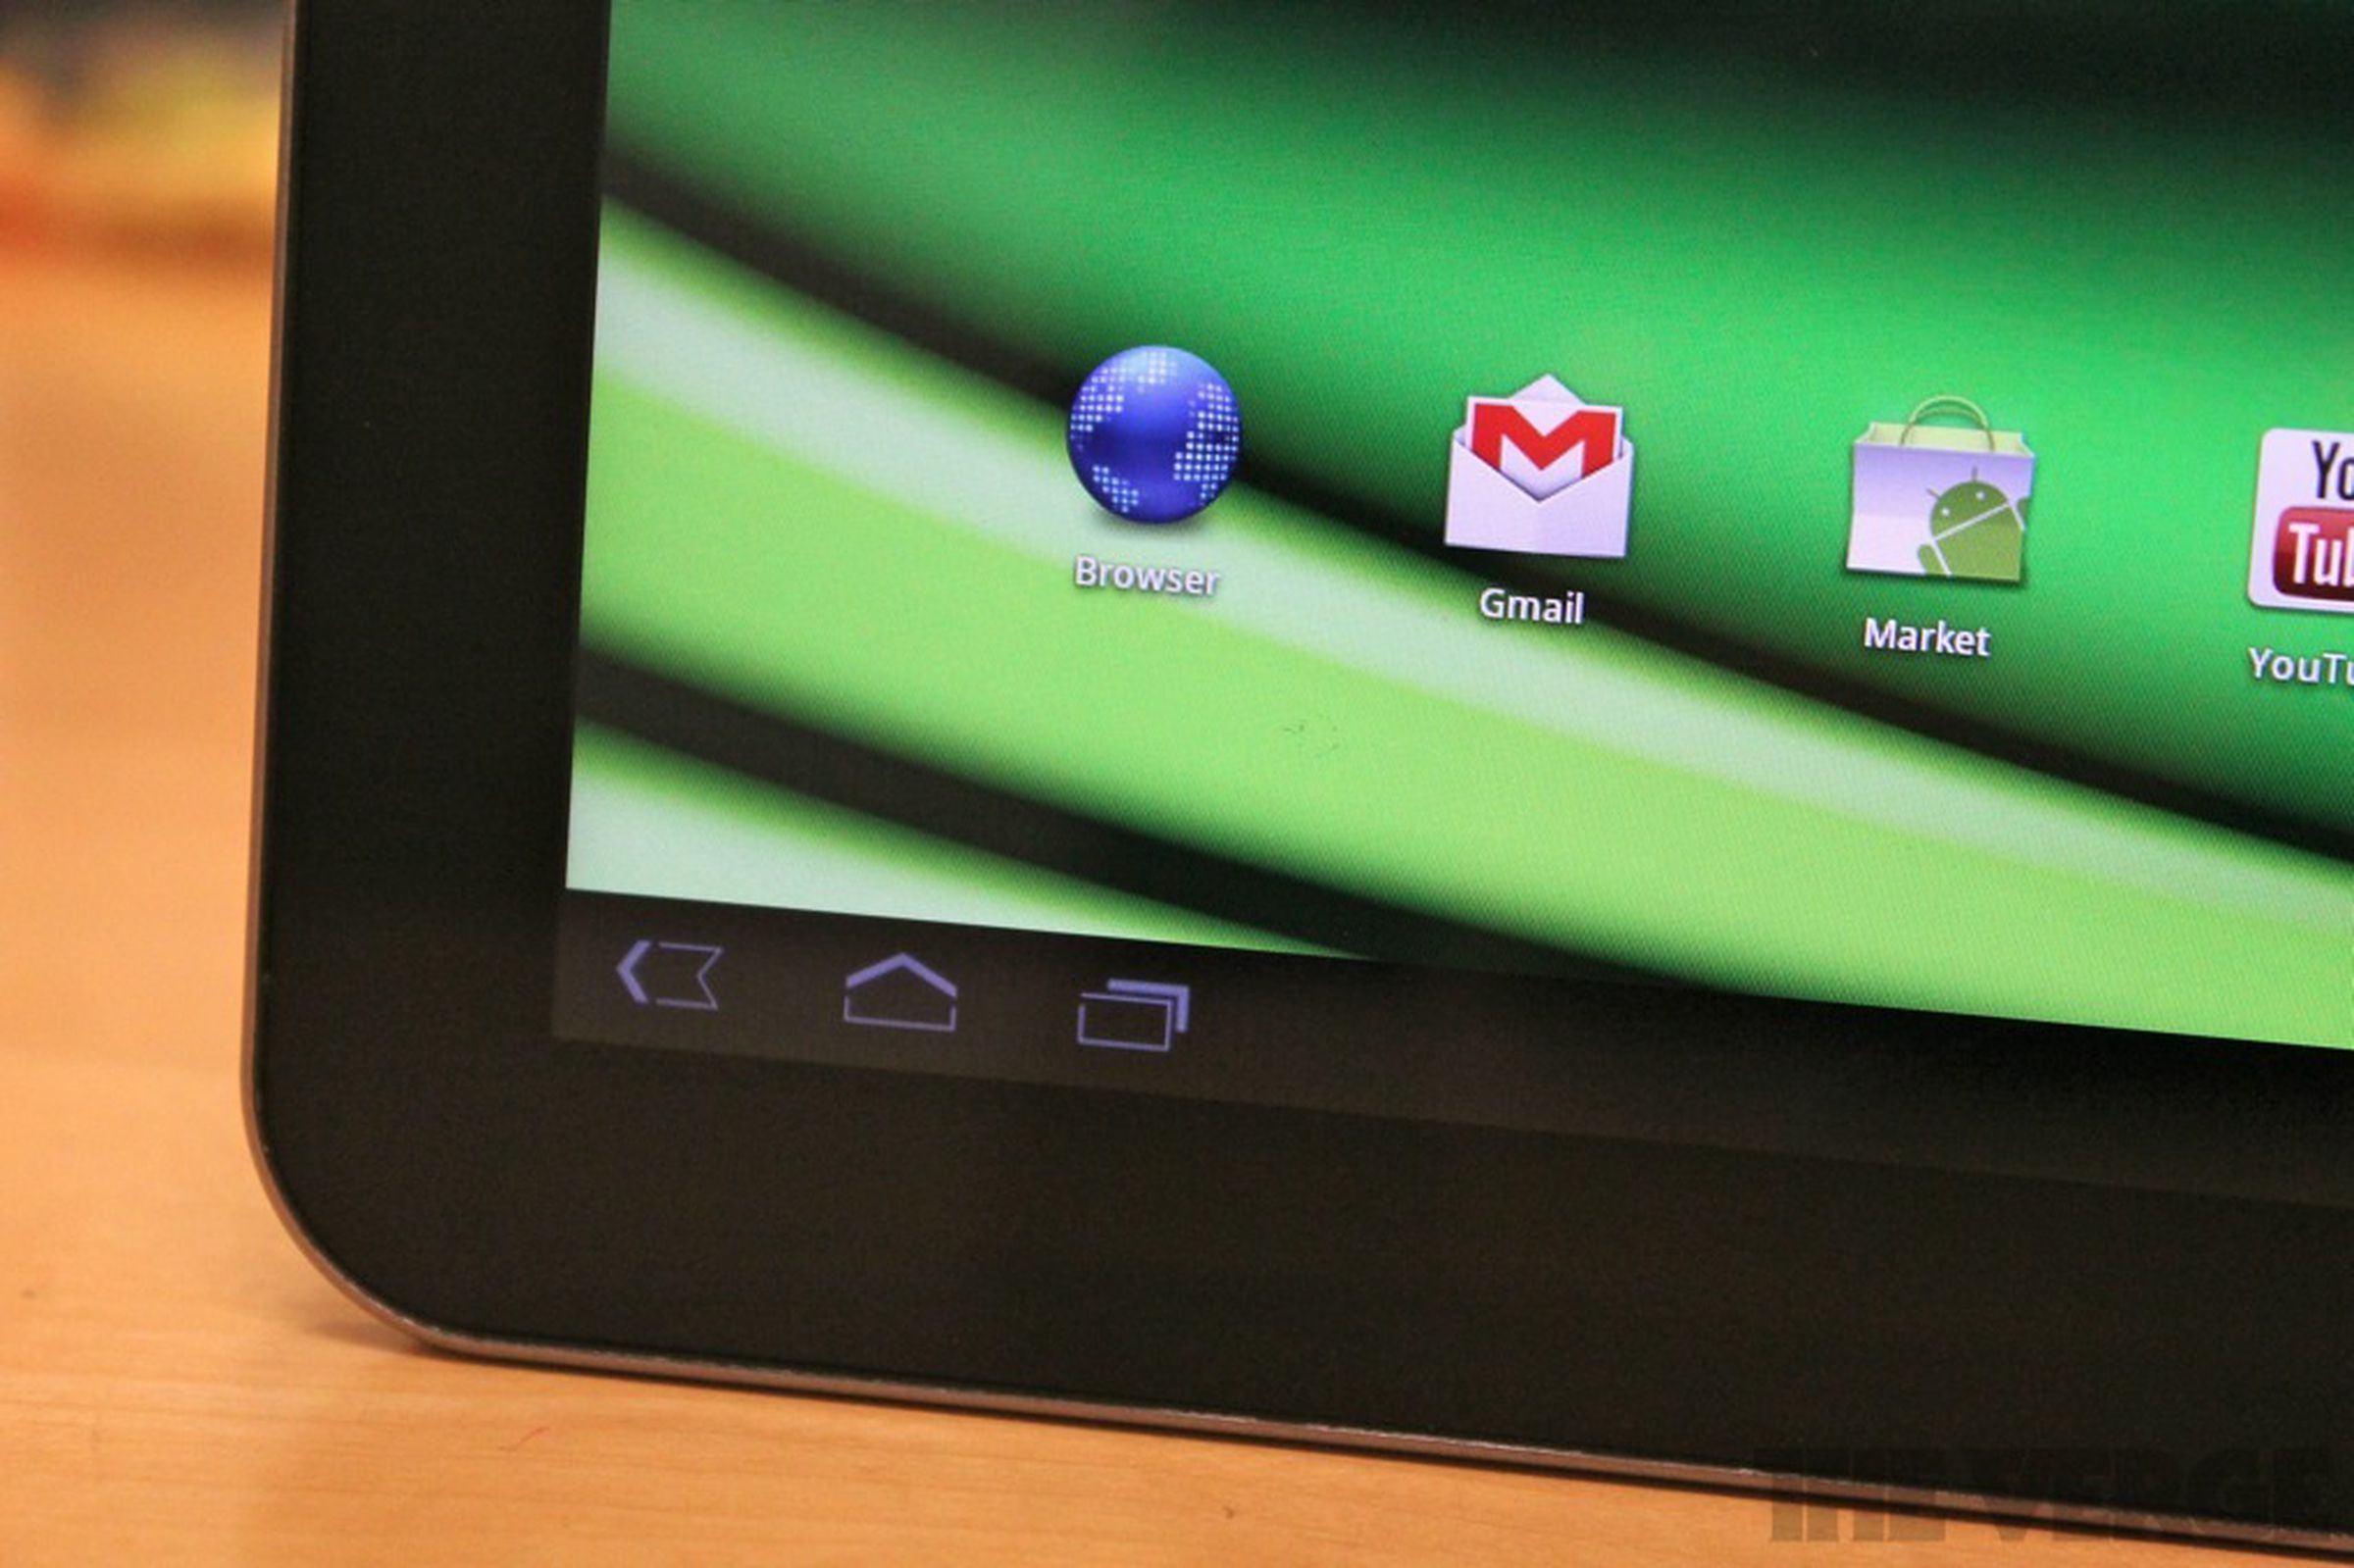 Toshiba Excite X10 hands-on pictures 